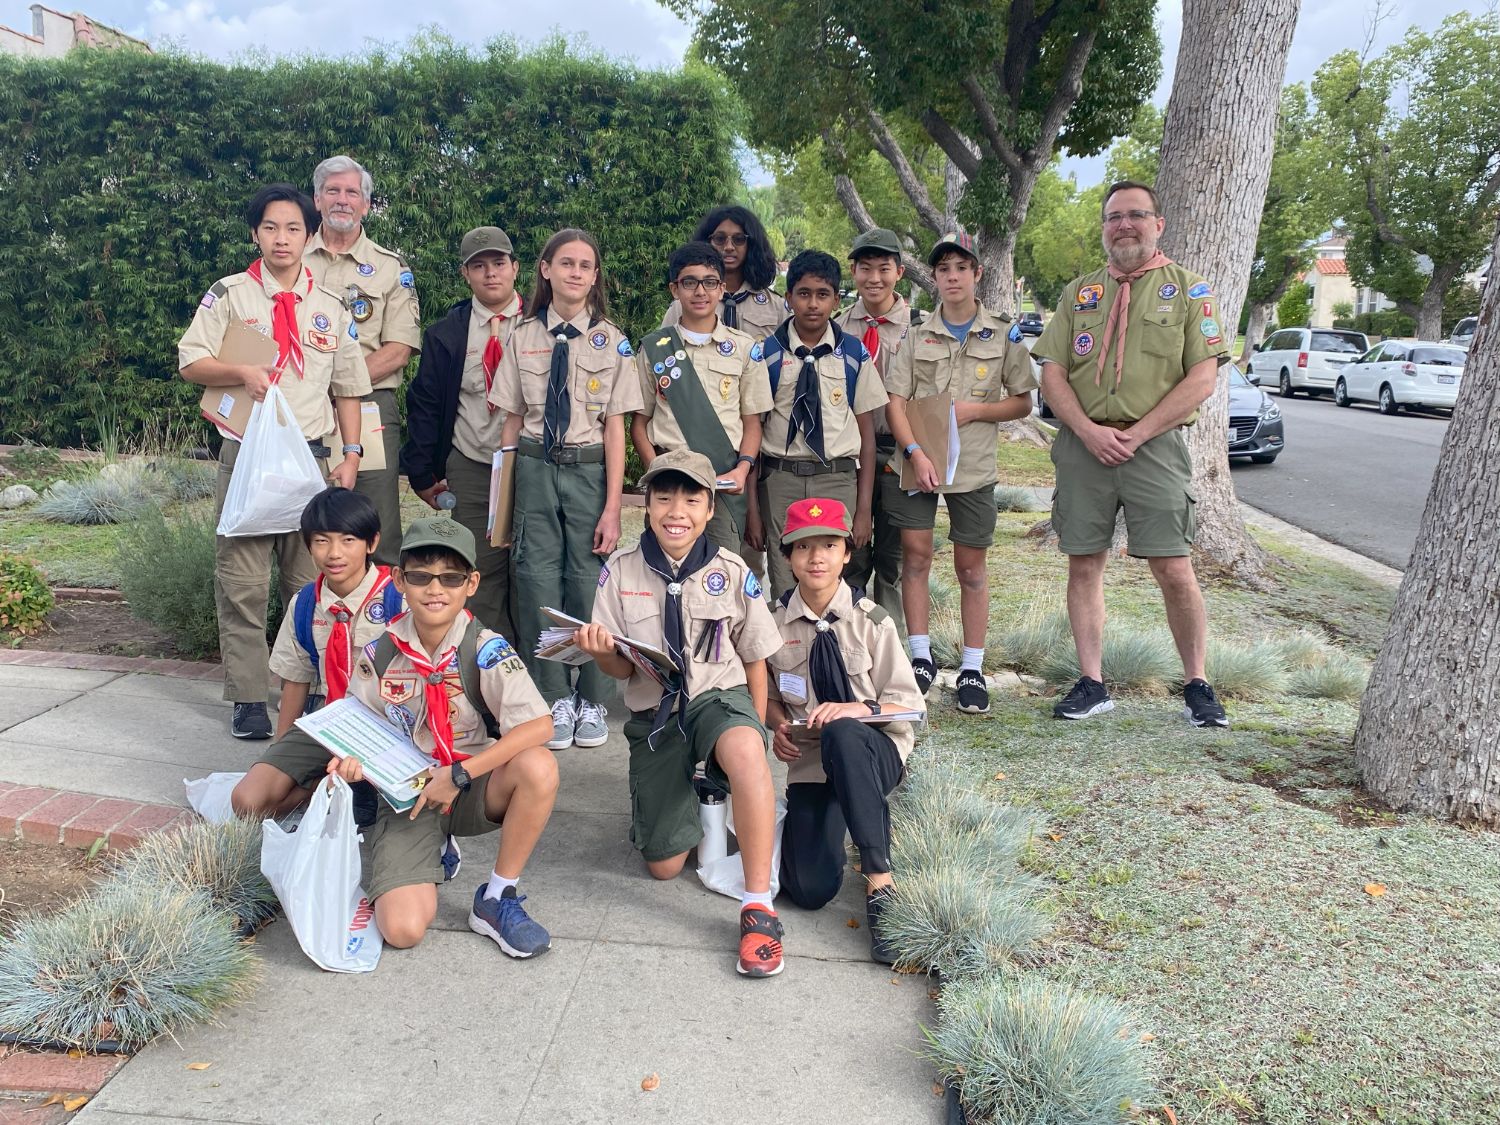 PHOTO: provided by Scout Troup 342 | The South Pasadenan | Troop 342 and Troop 7 gathered together before going out into the neighborhood to sell Christmas greenery.